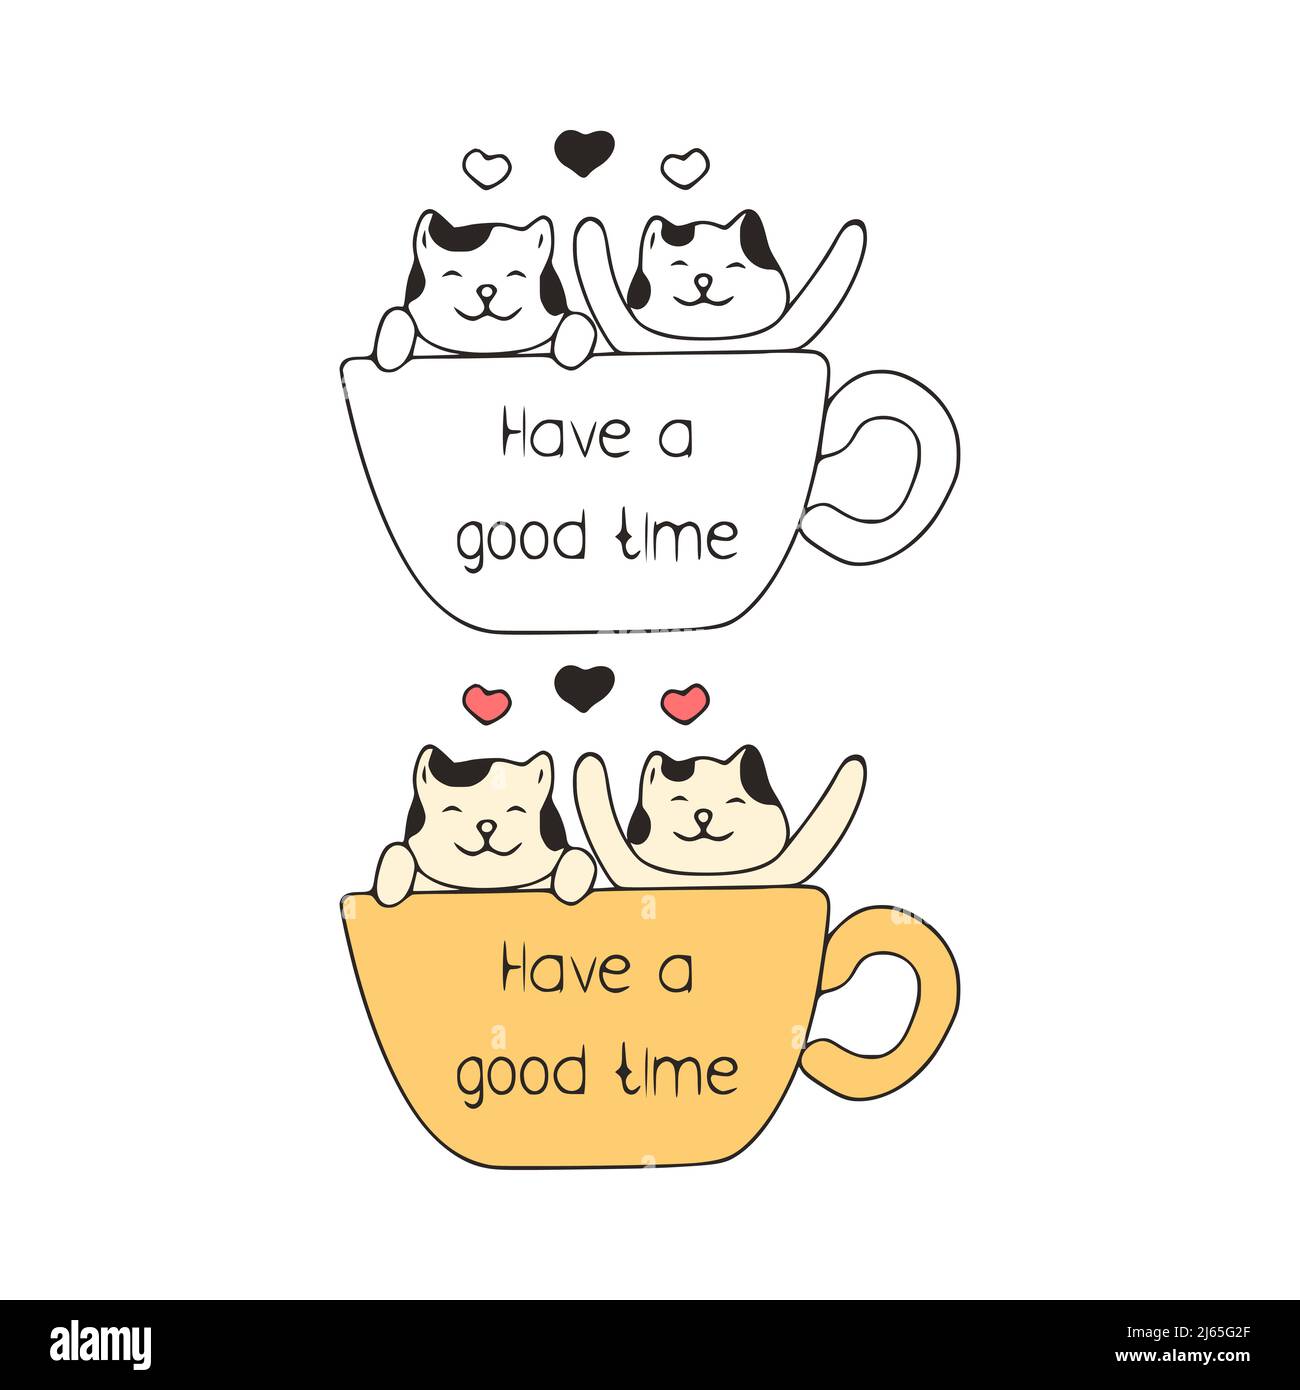 Funny cats in a cup doodle icon, Have a good time artwork. Cute pets vector art on white background. Stock Vector